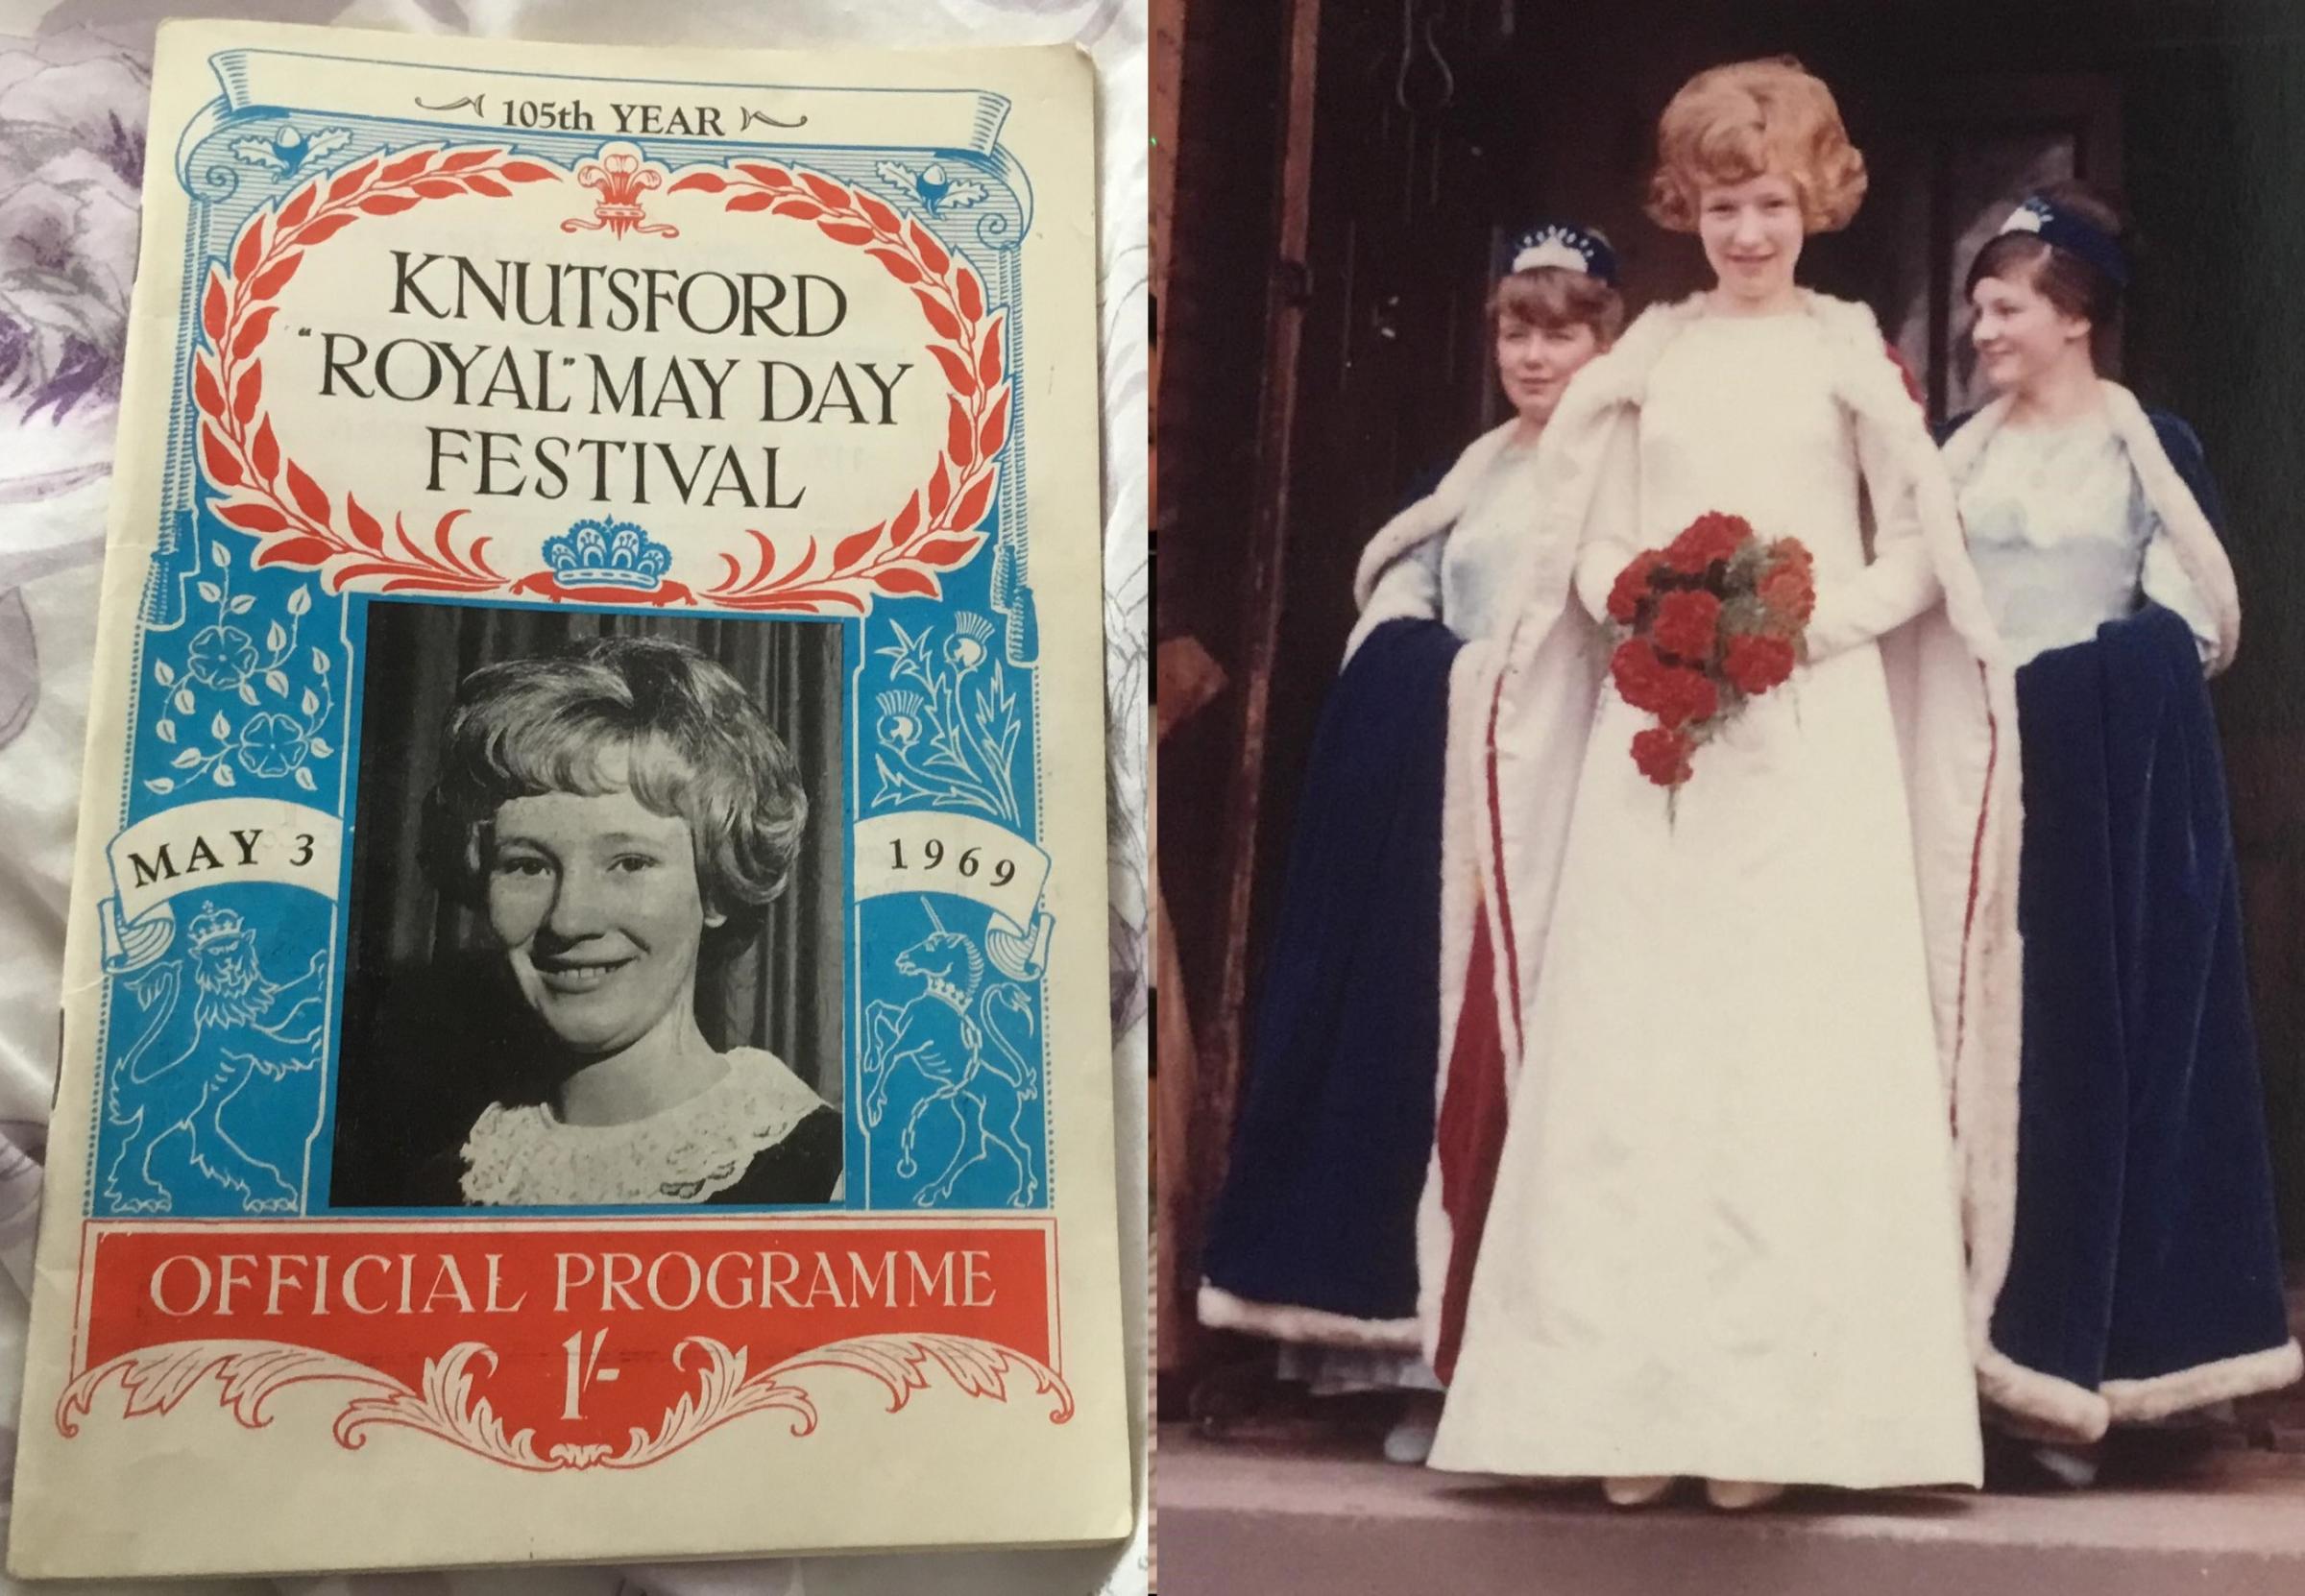 Diana was Knutsford May Queen in 1969